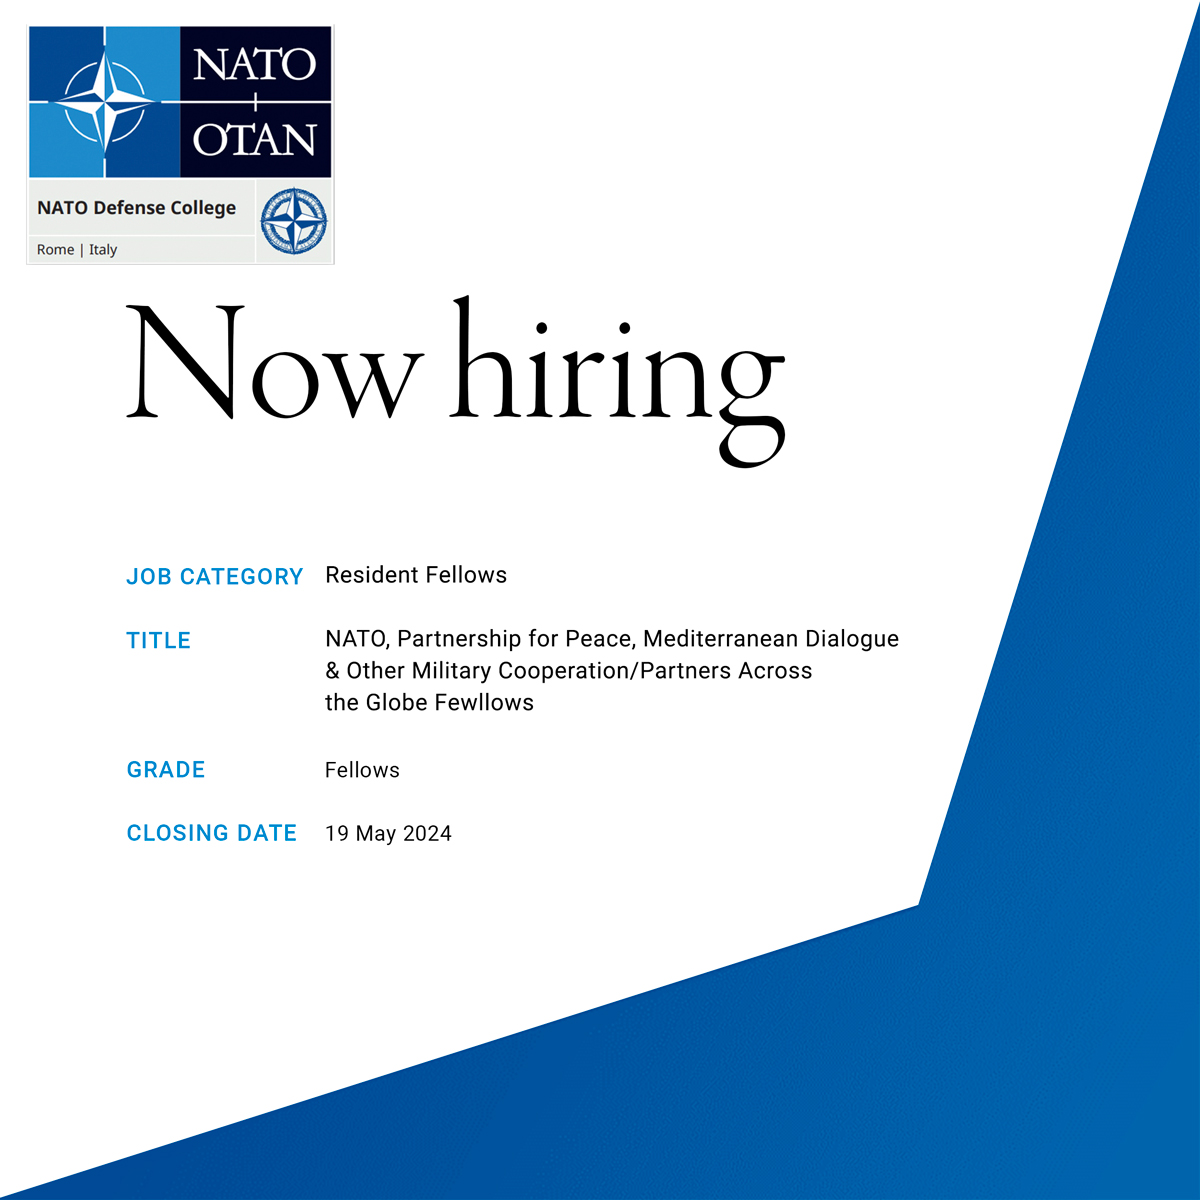 #NowHiring Apply for the 2025 NDC Resident Fellowships: Helping researchers achieve their potential while serving the Alliance! 🗓️ 19 May 2024 is the deadline. Apply now! ndc.nato.int/about/organiza… #Research #Fellowships #Jobs #WeAreNATO